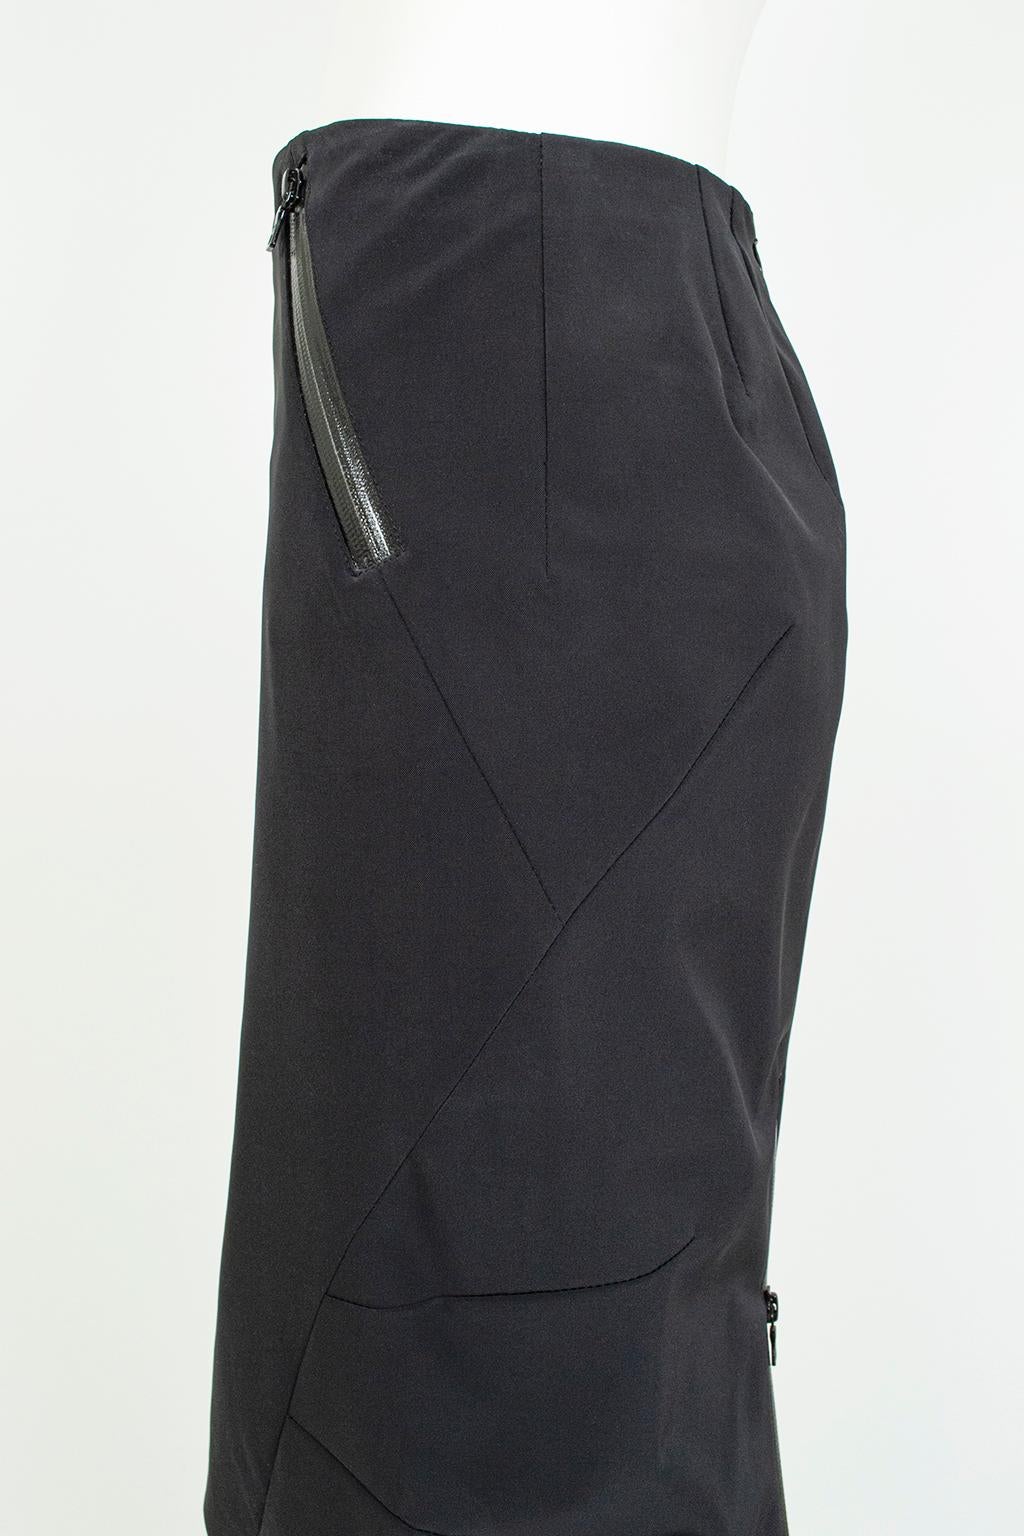 New Prada Black Corset-Seam Pencil Skirt with Vinyl Zippers and Vent – S, 2001 In New Condition For Sale In Tucson, AZ